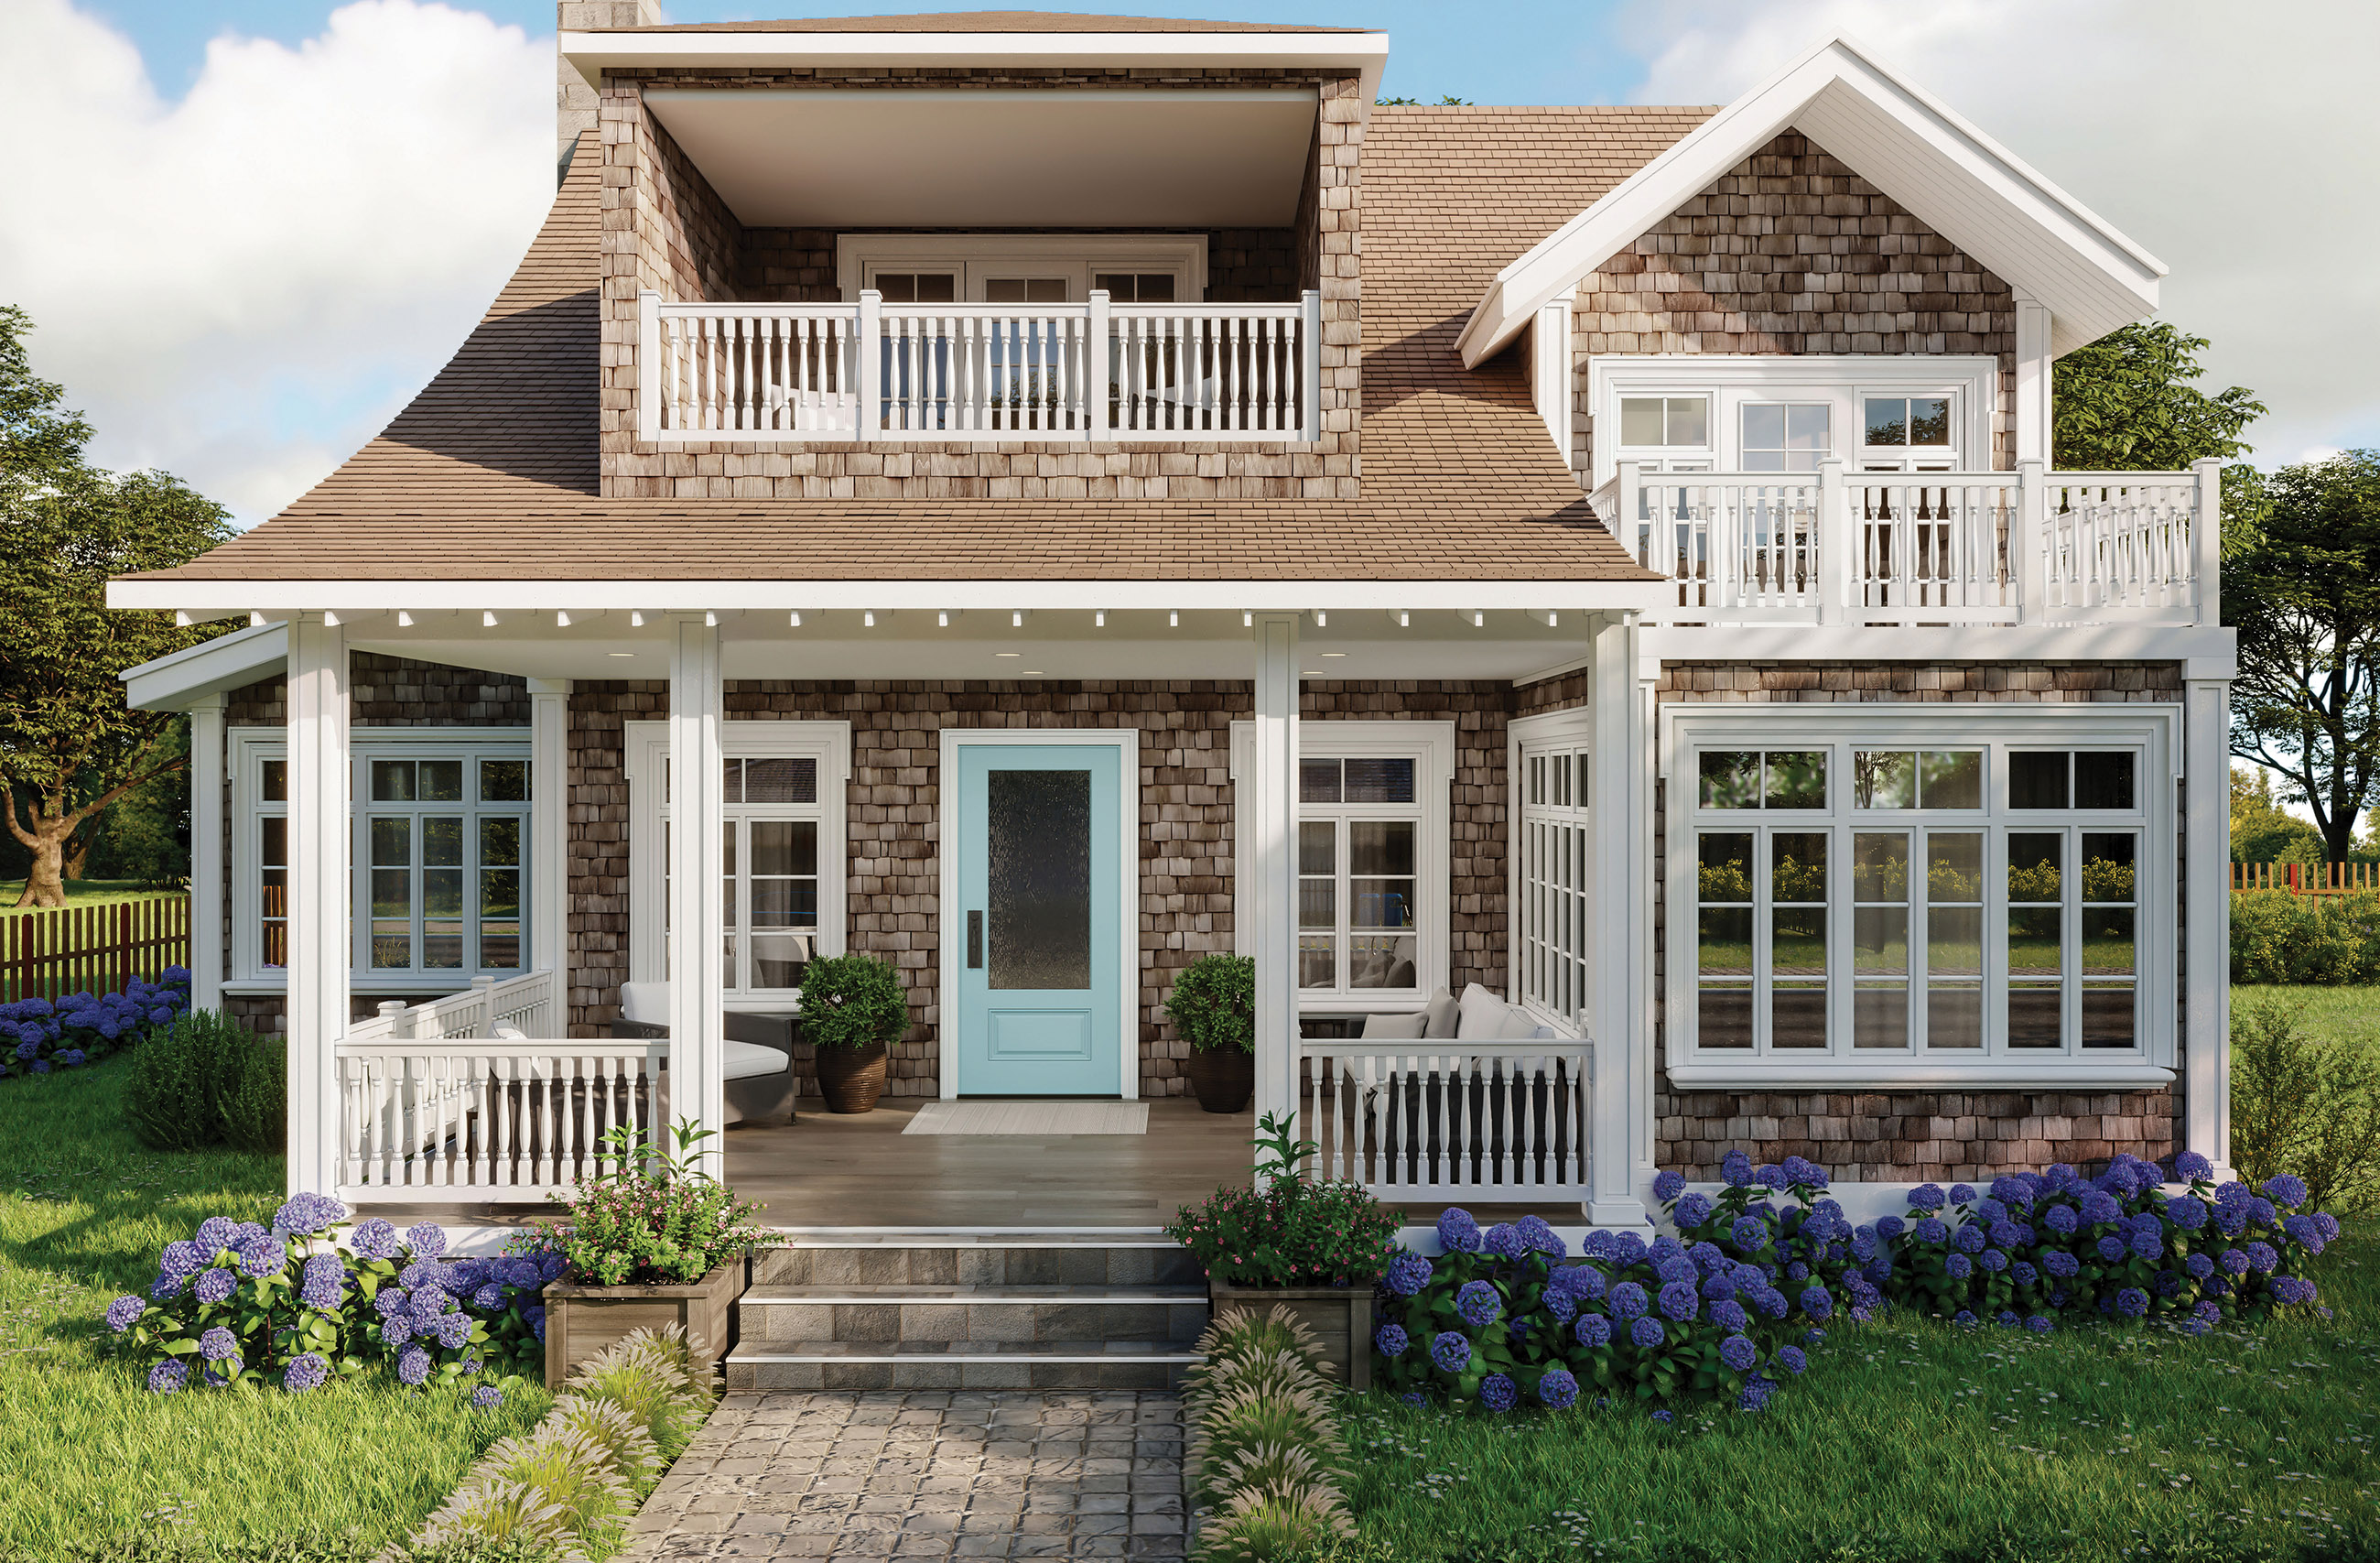 JELD-WEN fiberglass and steel doors combine energy-efficient durability with aesthetic appeal – key homeowner priorities, according to a new survey.